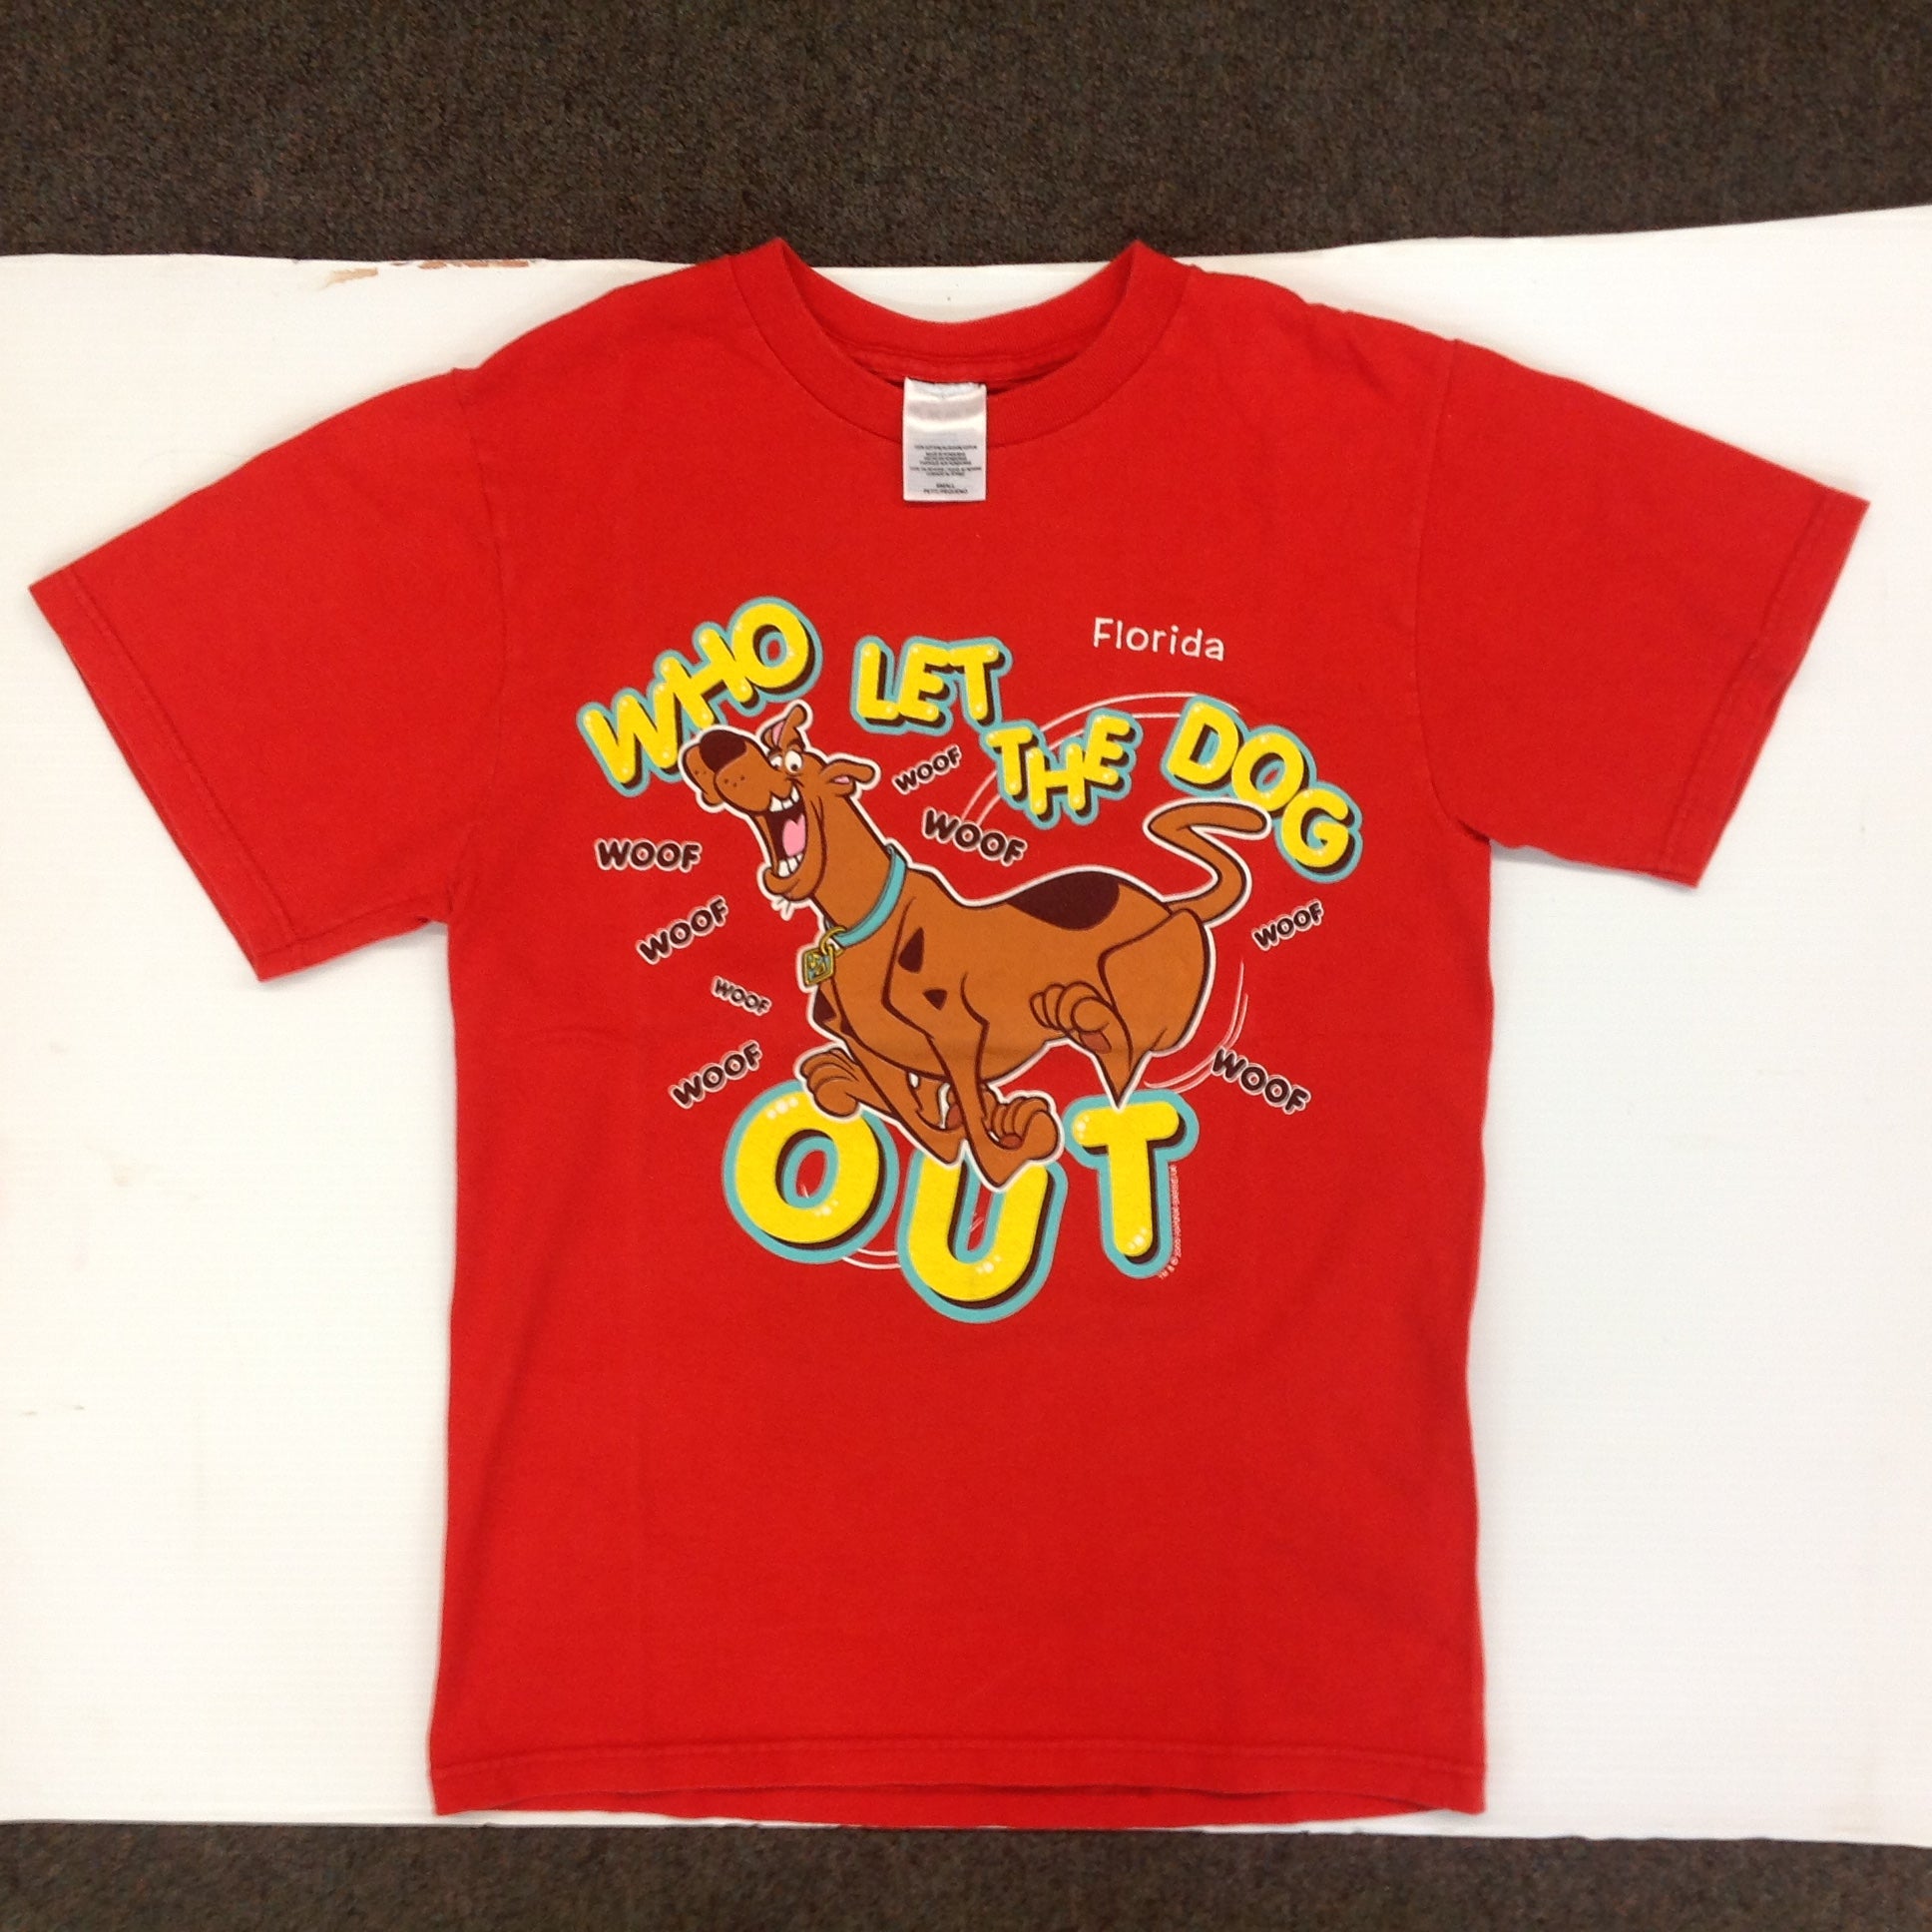 Vintage 2000 Souvenir T-Shirt Florida Scooby-Doo Who Let the Dog Out? Hanna-Barbera Red Small